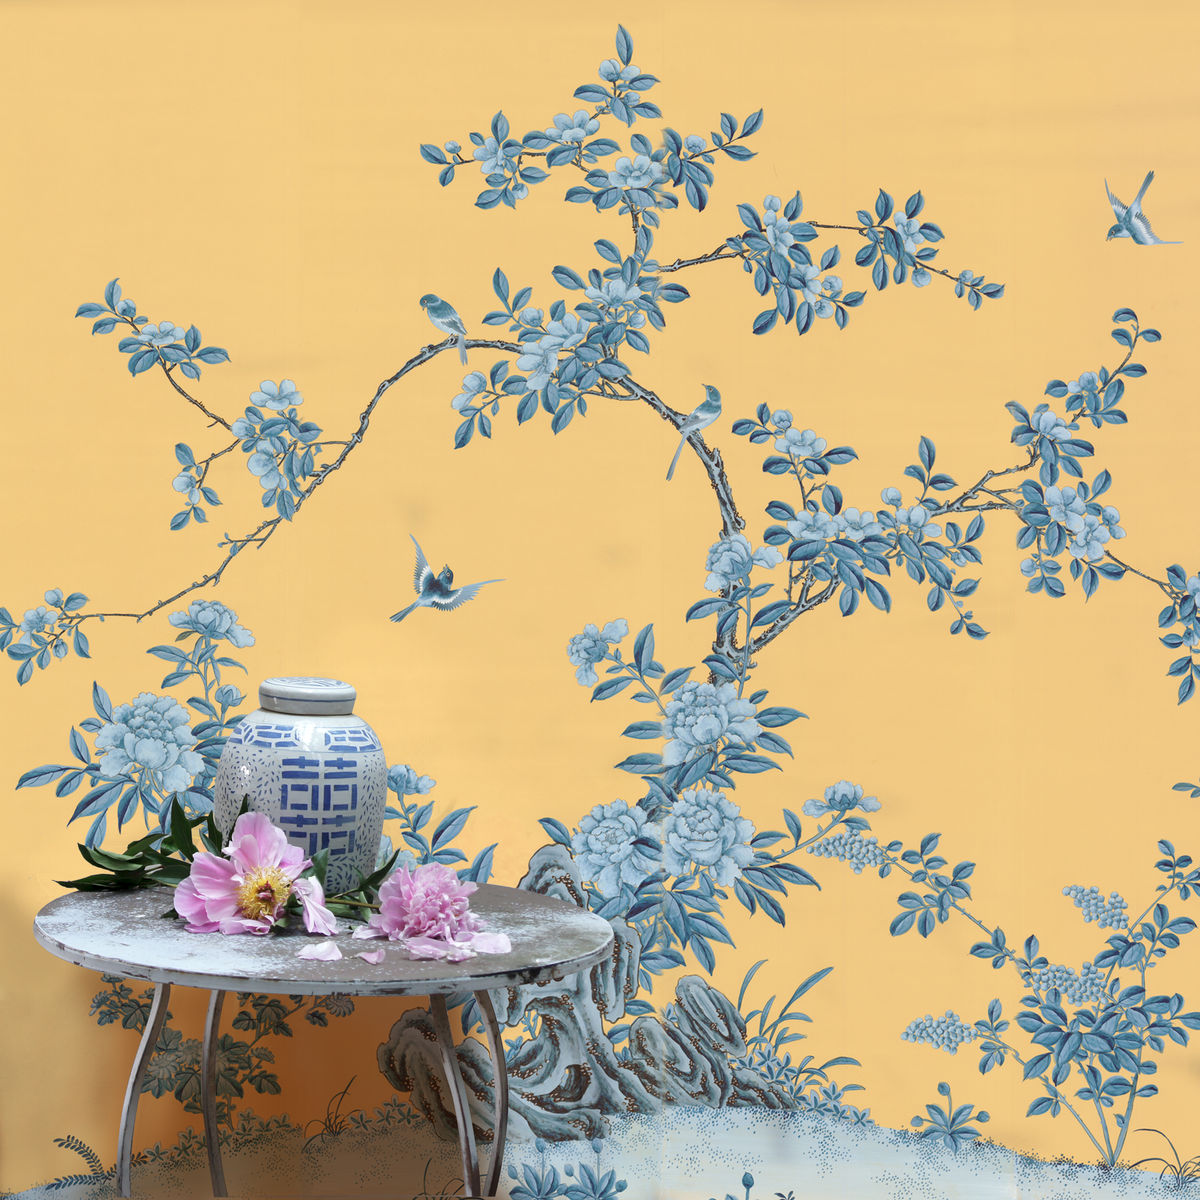 Chinoiserie Wallpaper Panels 2015 Best Auto Reviews 1200x1200